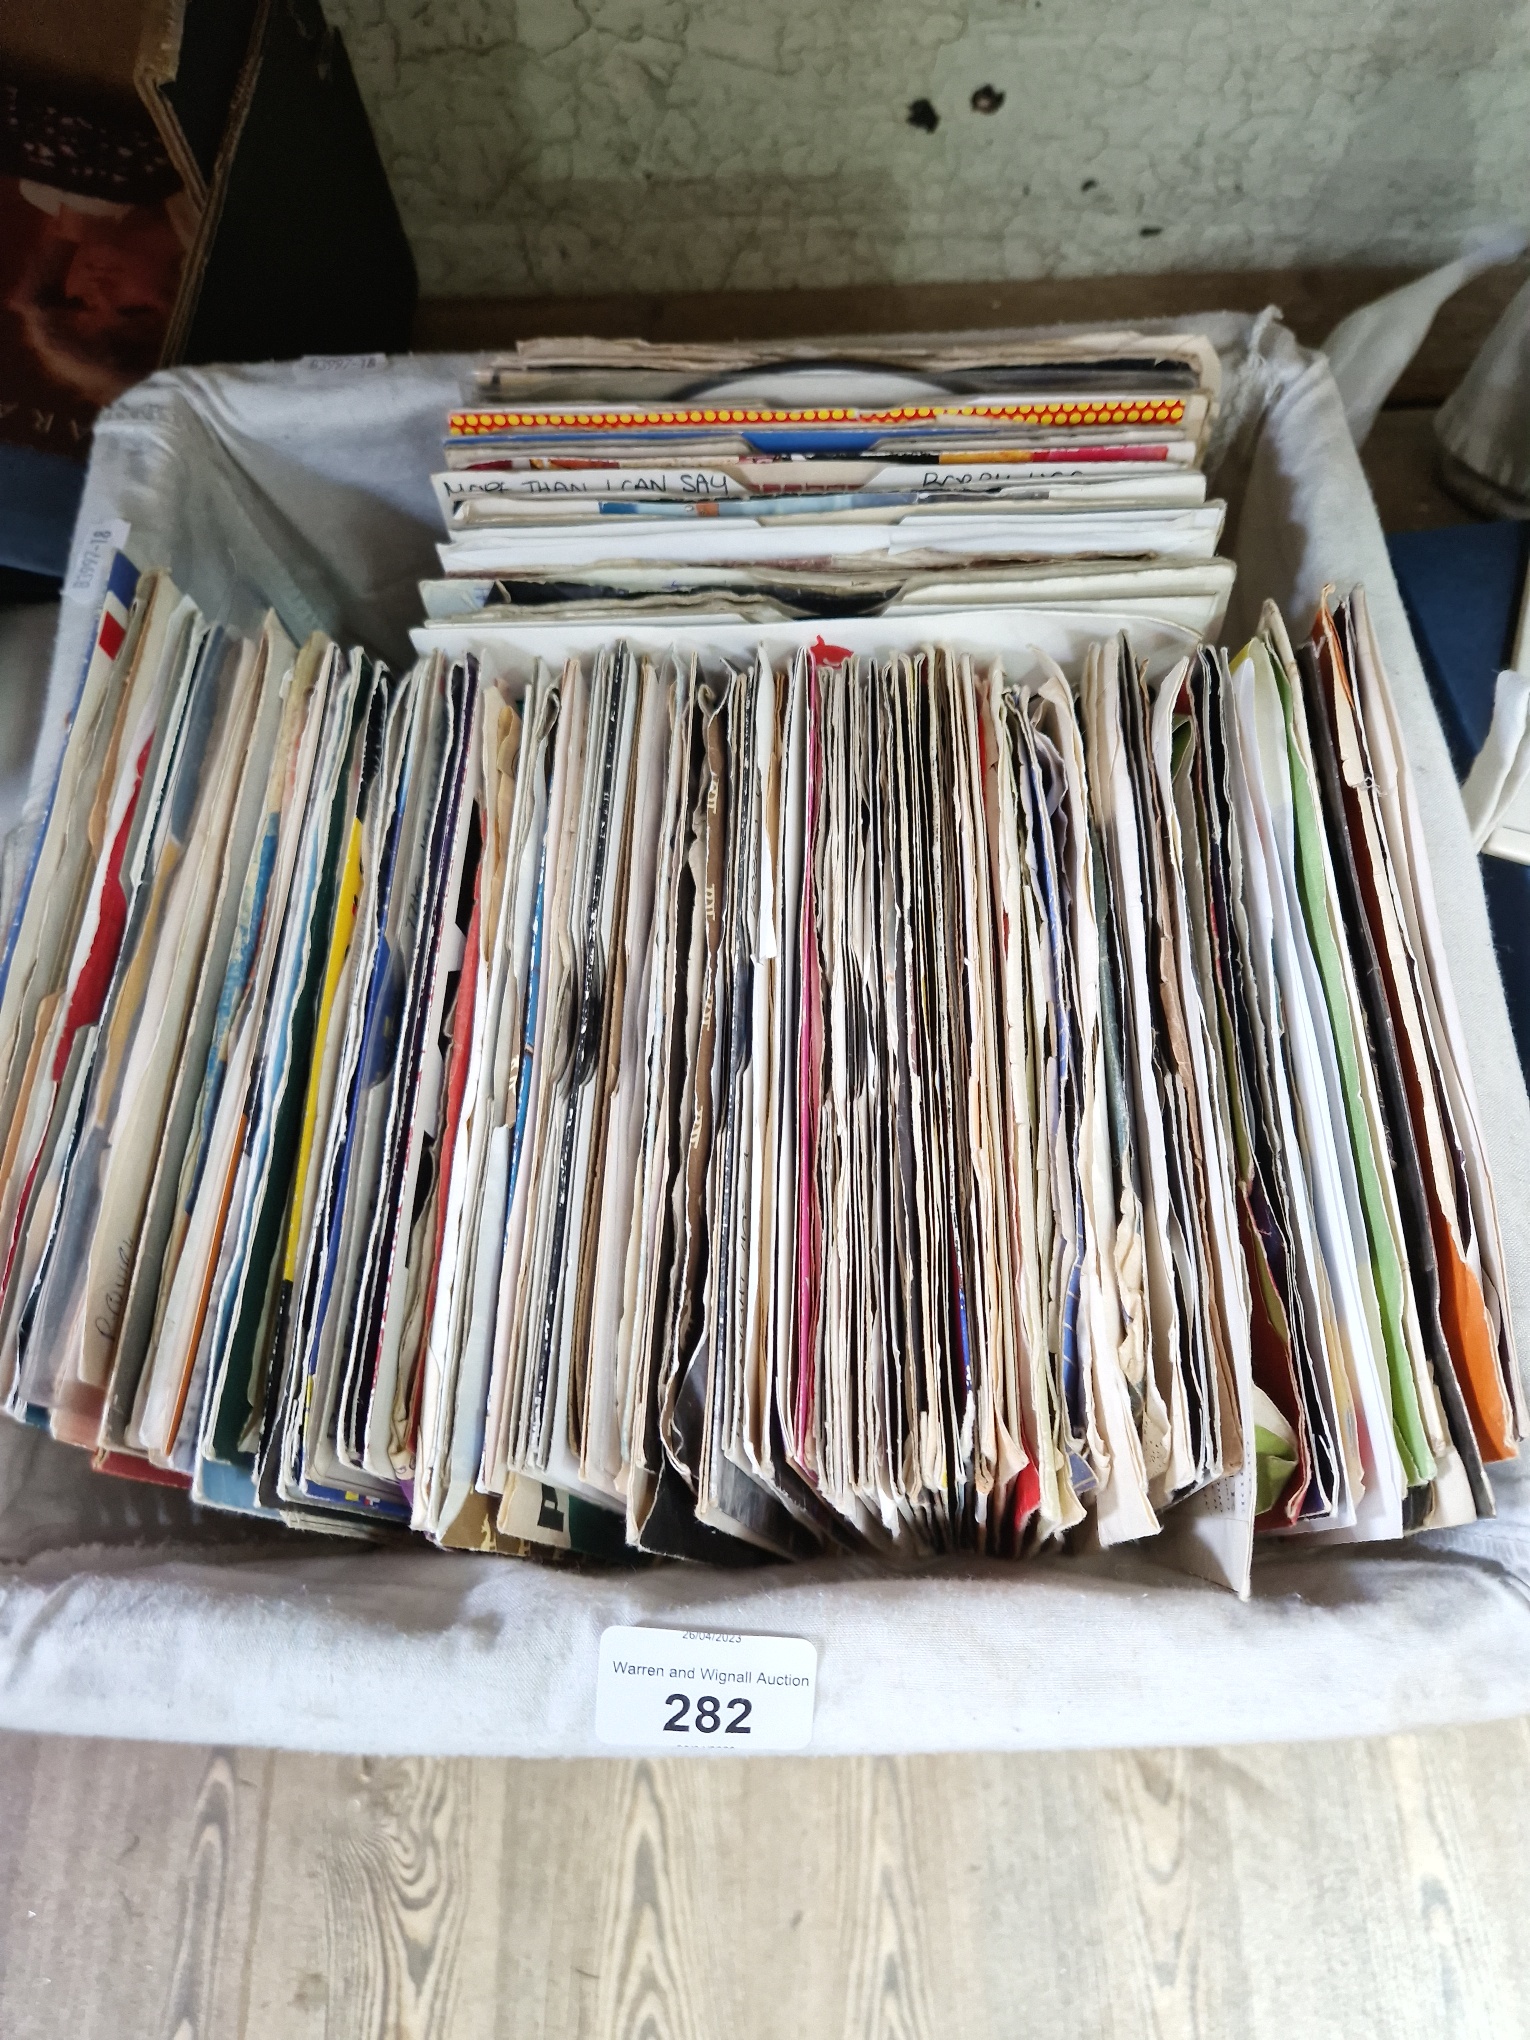 A basket of approximately 150 vinyl 7" singles, 1960s to 1990s, including The Beatles, Elvis, The